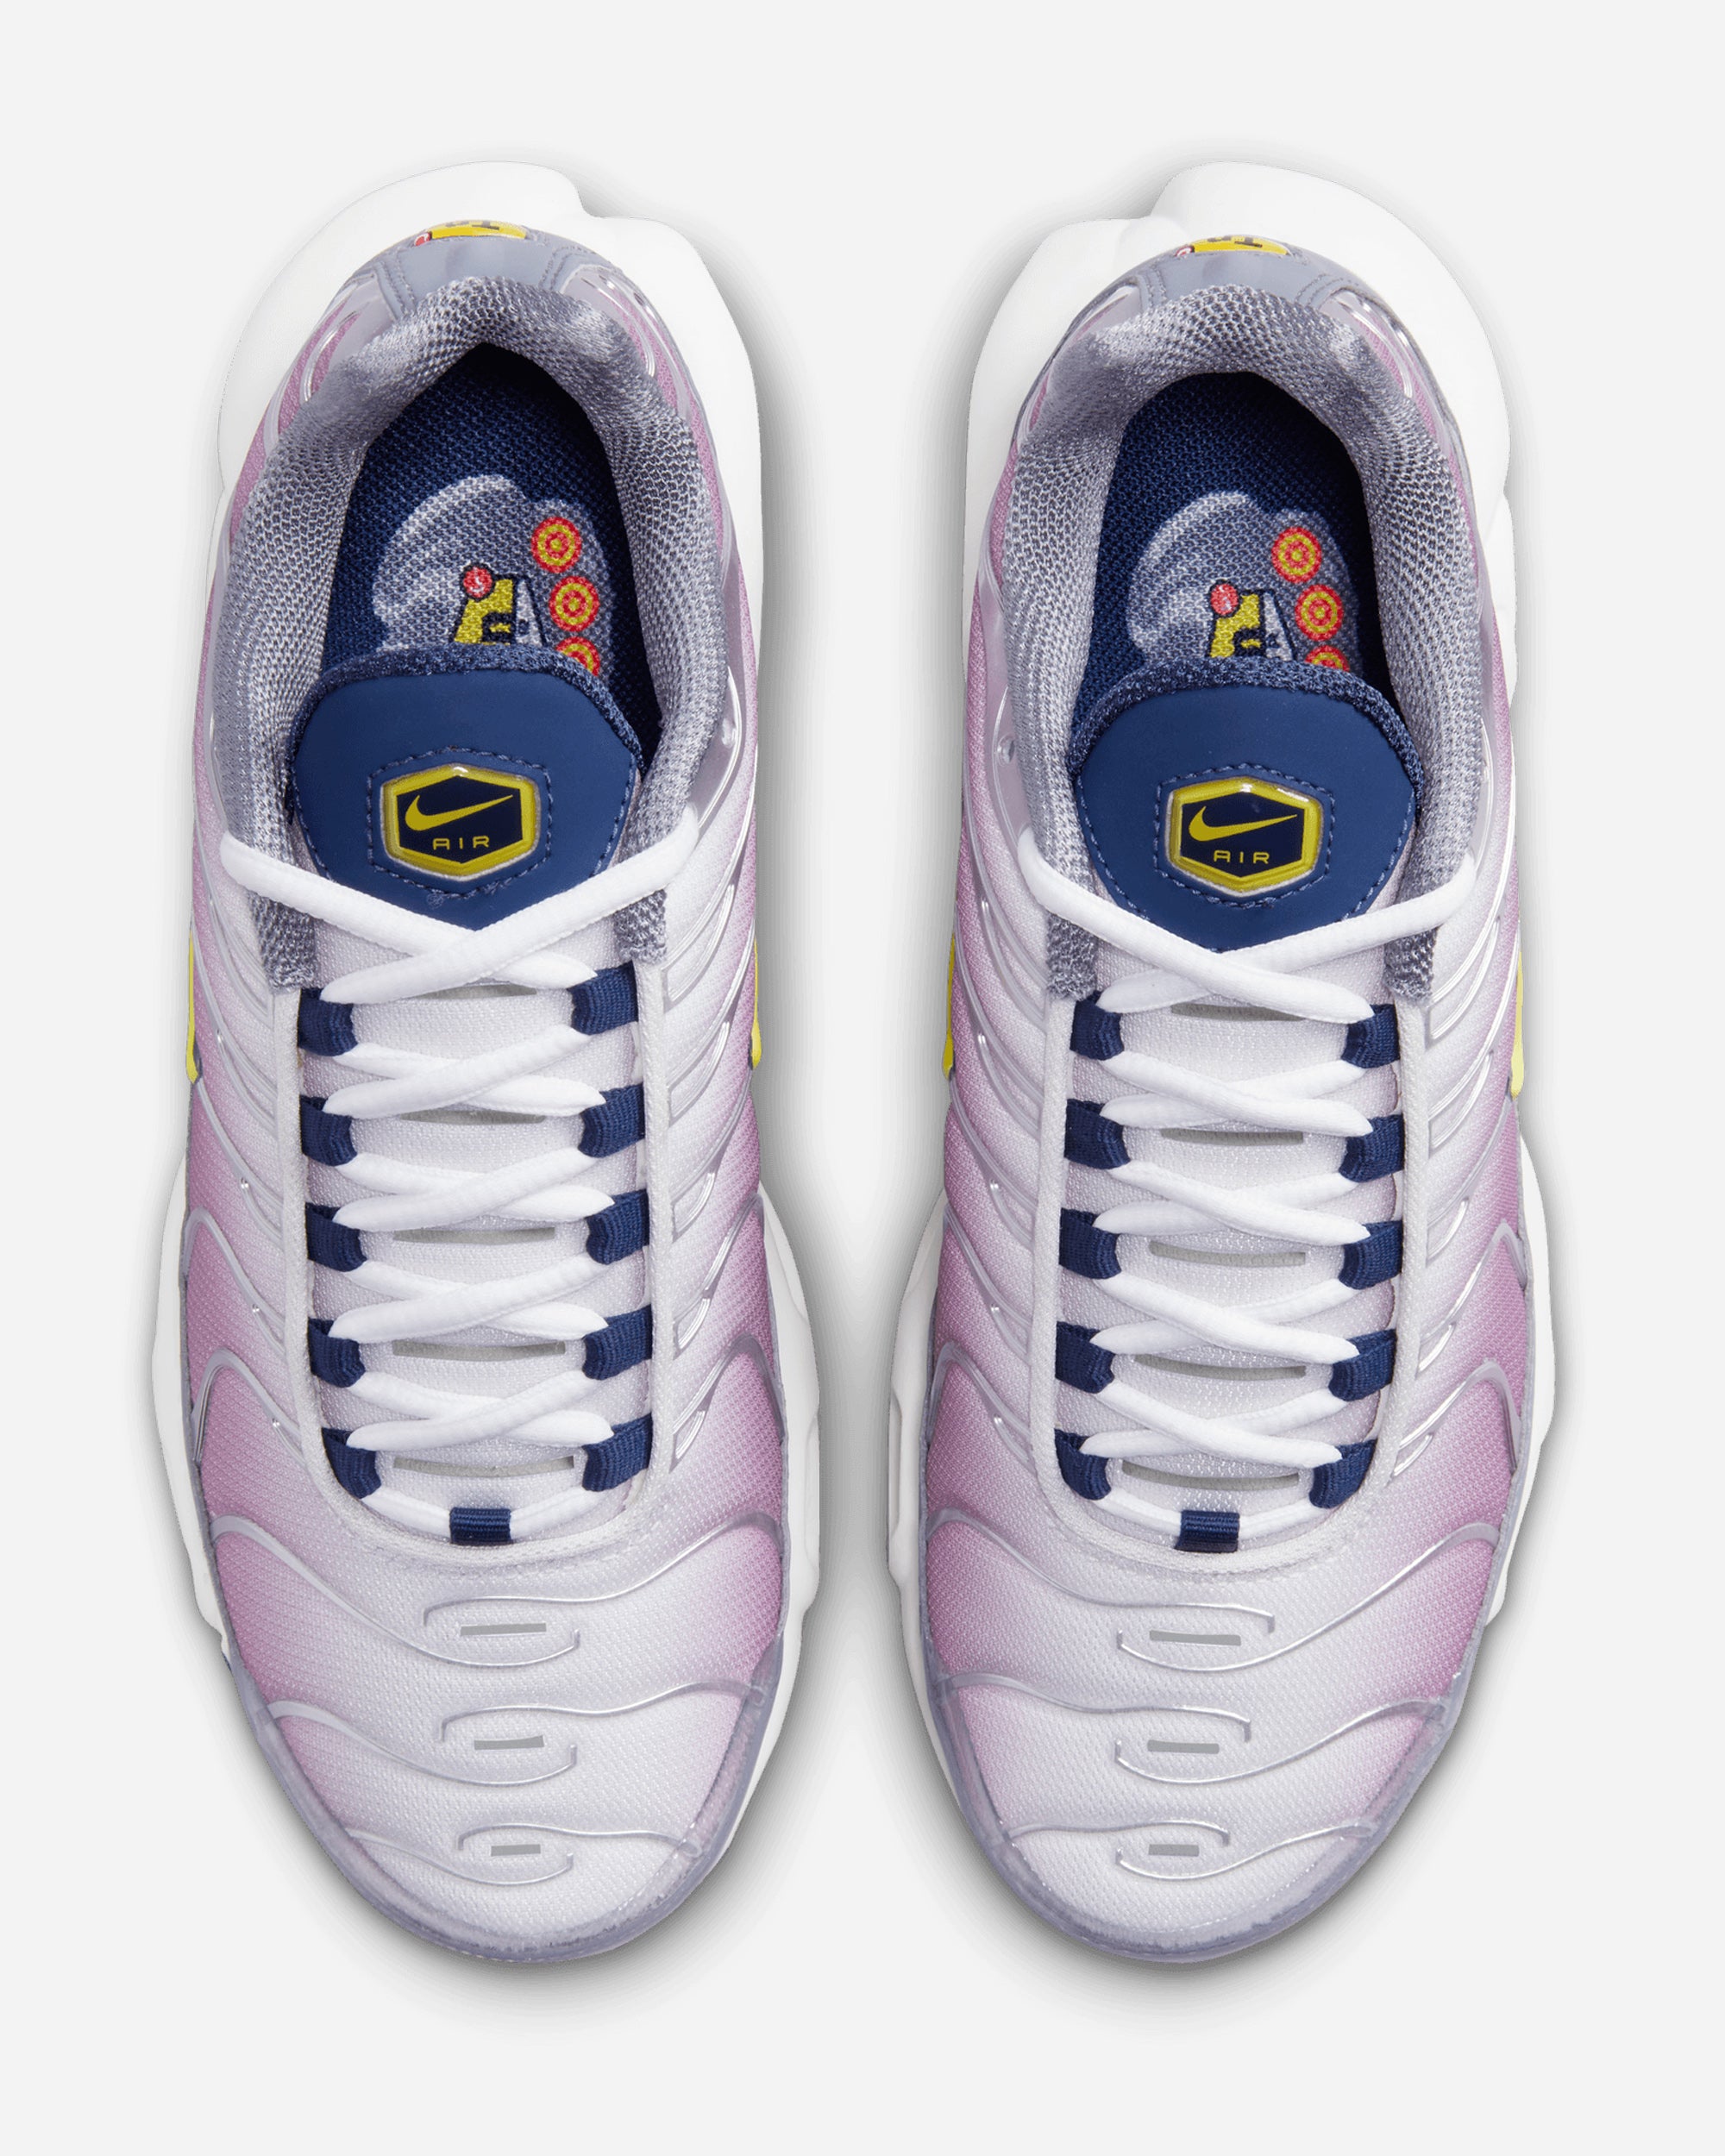 NIKE QS/TZ Air Max Plus 'Violet Dust and High Voltage' VIOLET DUST/HIGH VOLTAGE FN8007-500